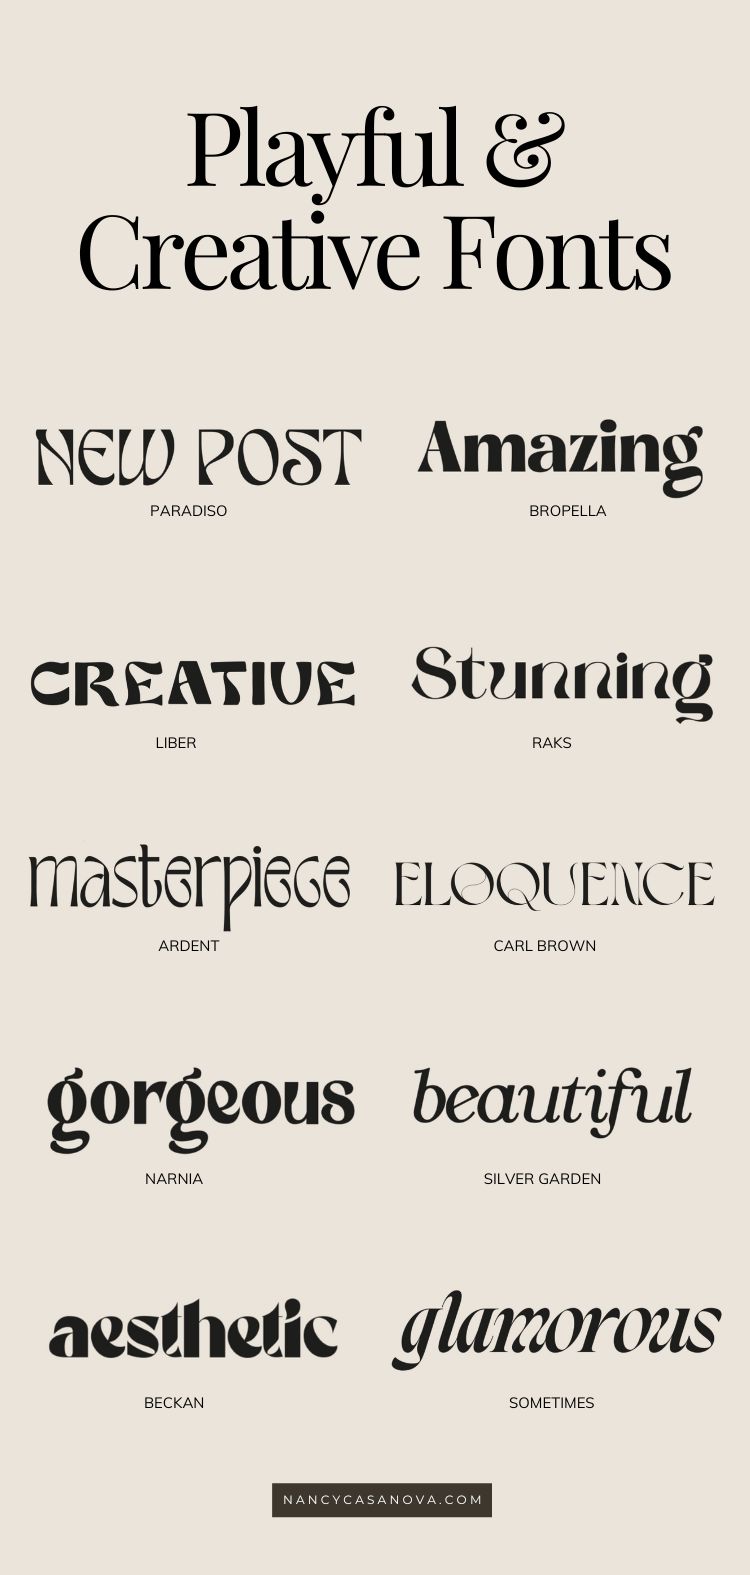 These are fonts that have alluring shapes, bold looks, or playful styles that can help you create unique and memorable designs. Whether you're working on logos, branding, magazine or editorial headlines, packaging, merch or other design projects, these fonts can be a powerful tool to make your work stand out.